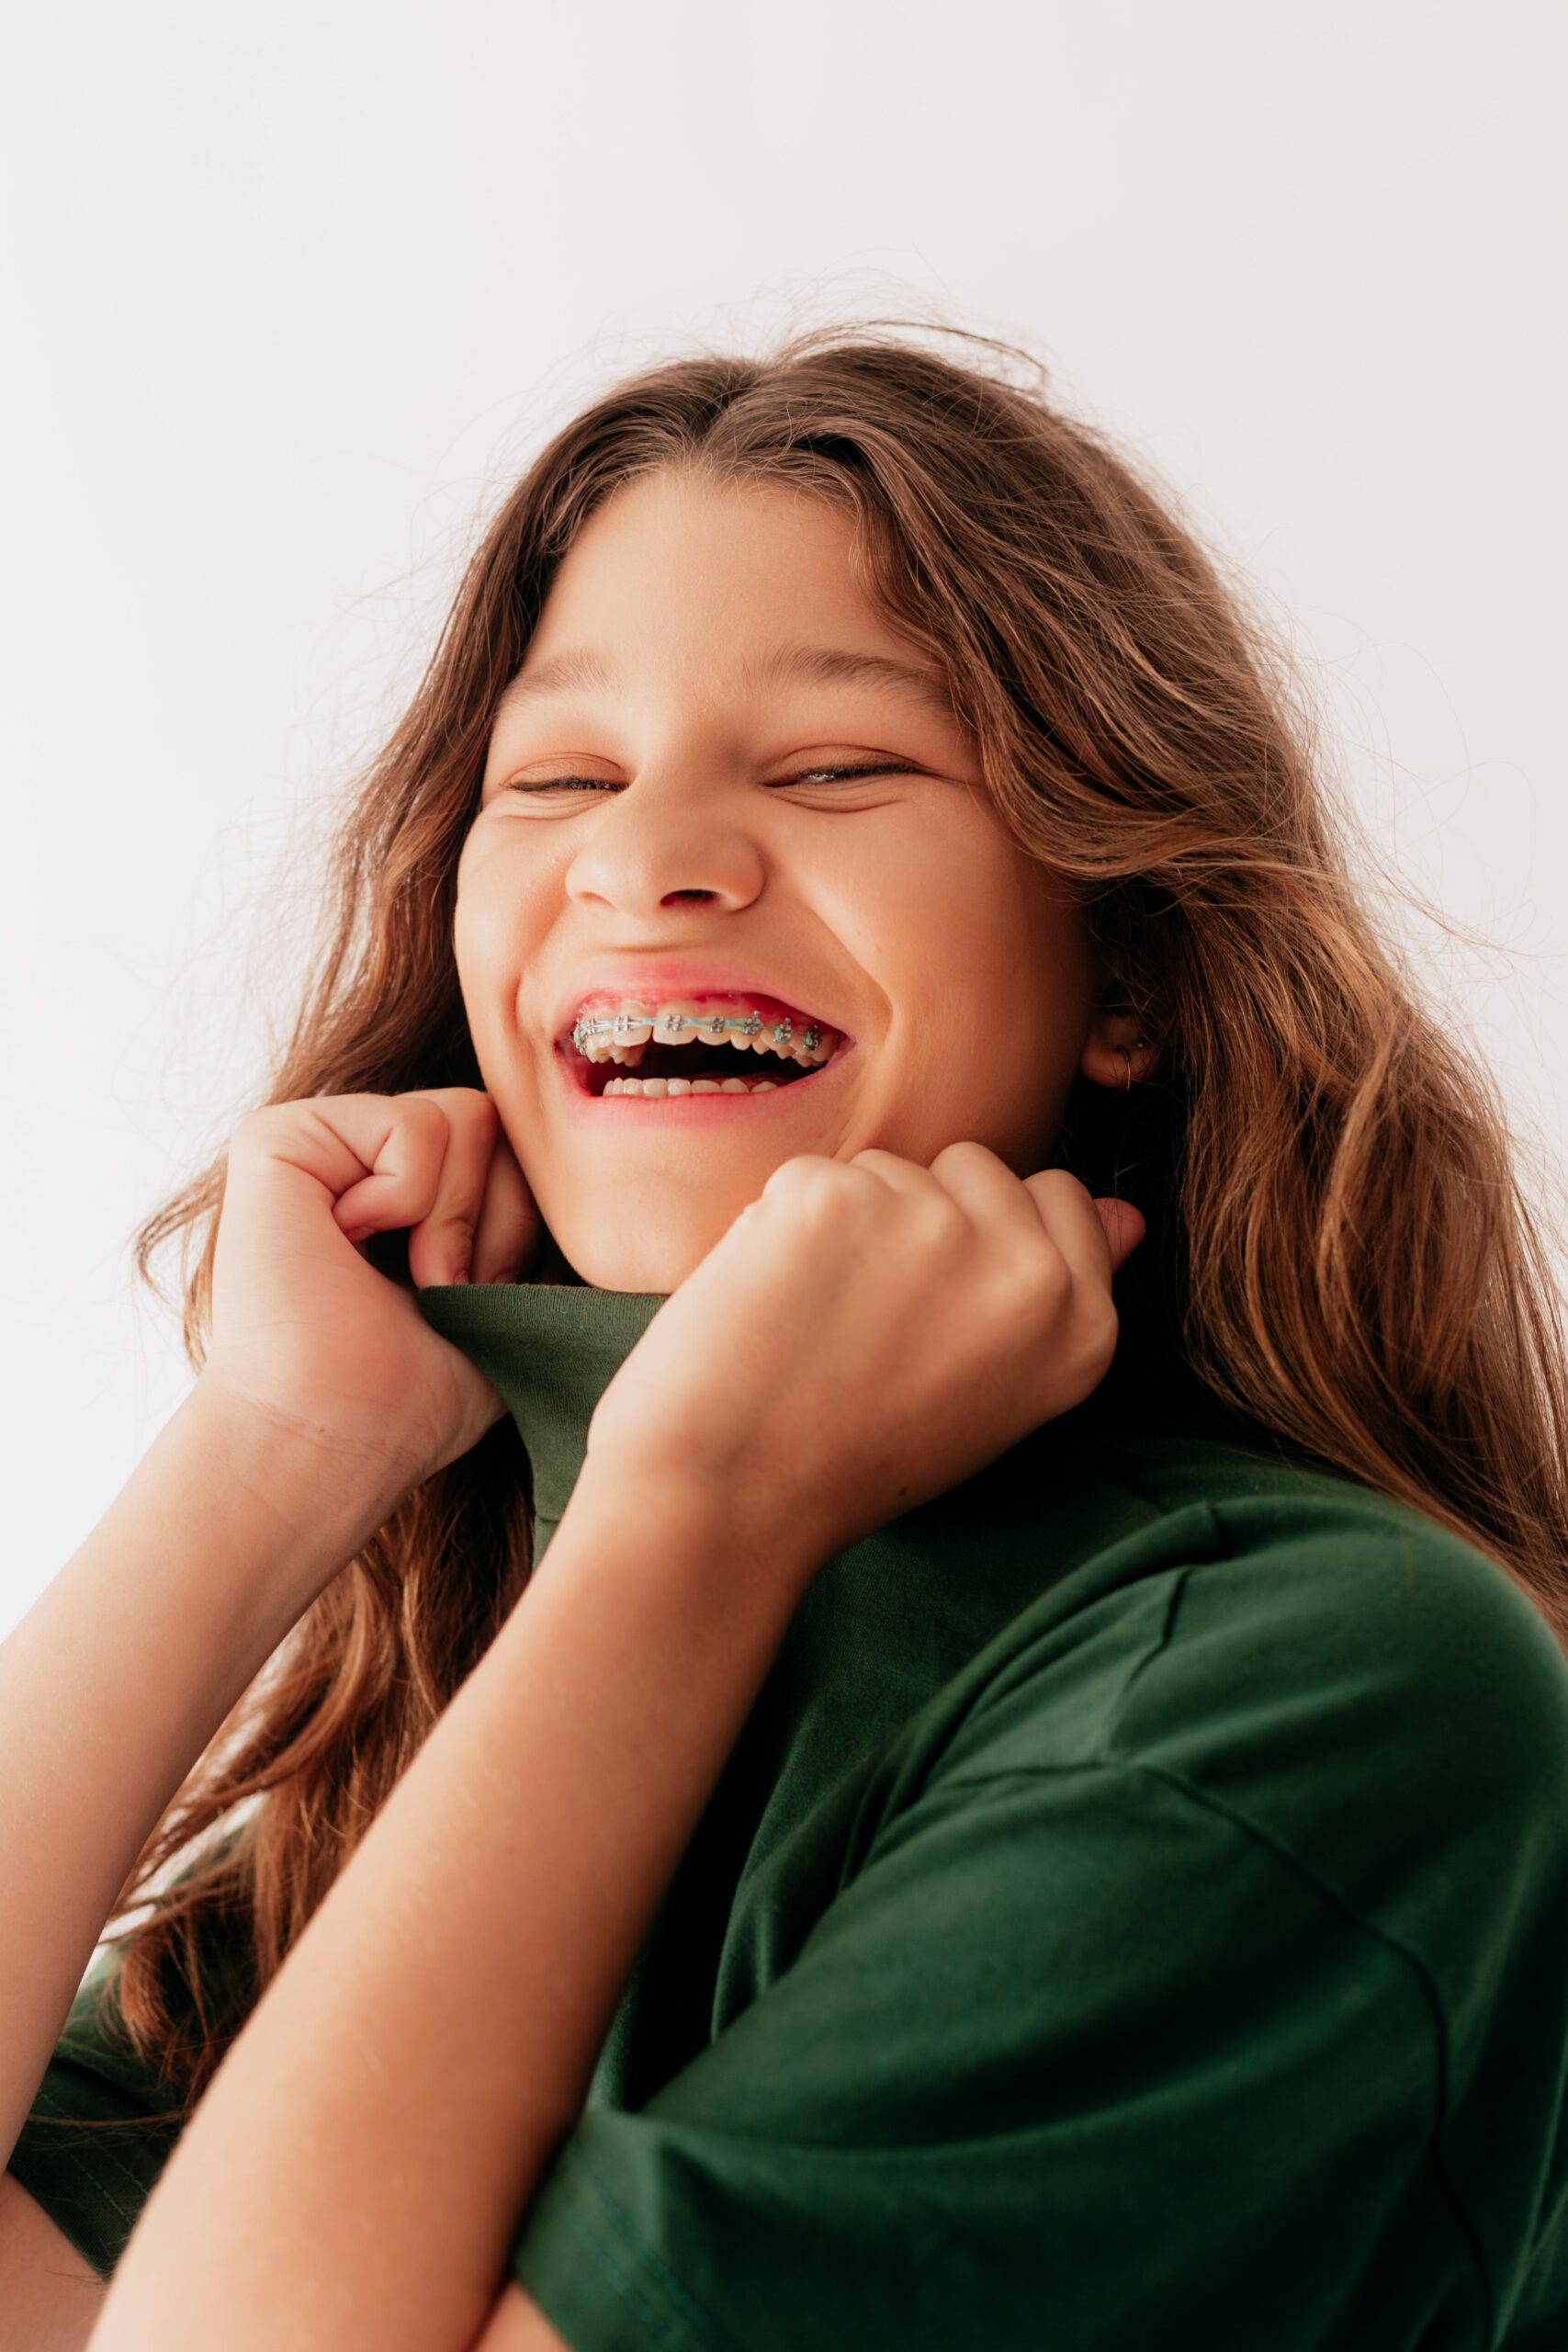 Smiling Girl with braces wearing green shirt